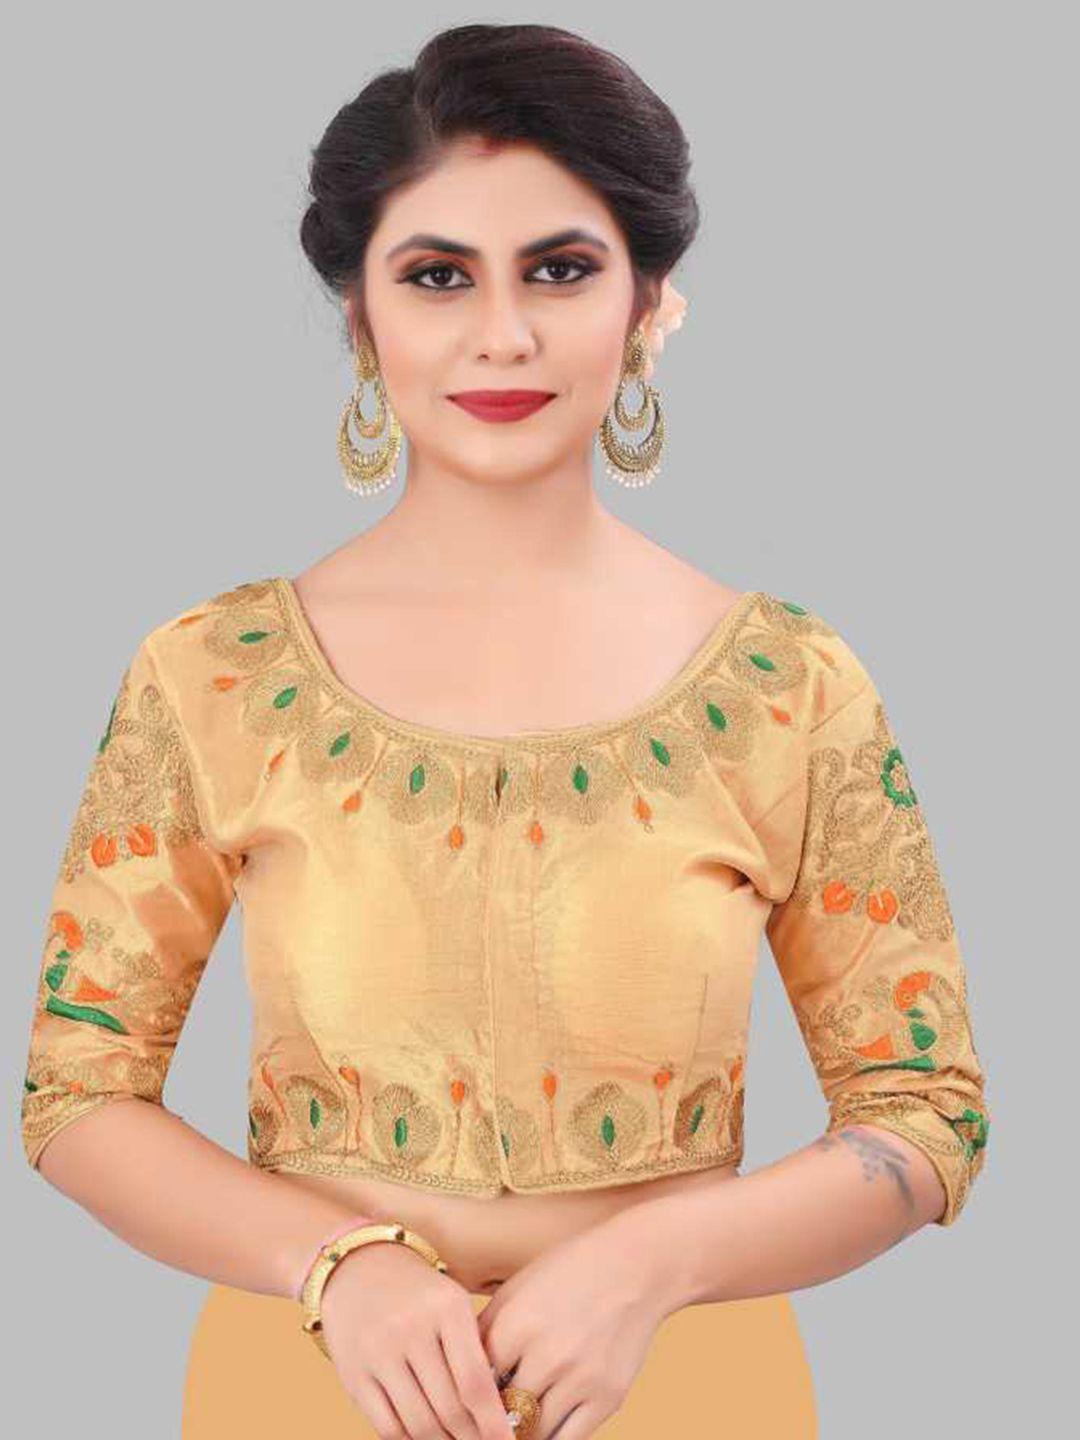 linaro-lifestyles-women-gold-&-green-embroidered-ready-made-saree-blouse